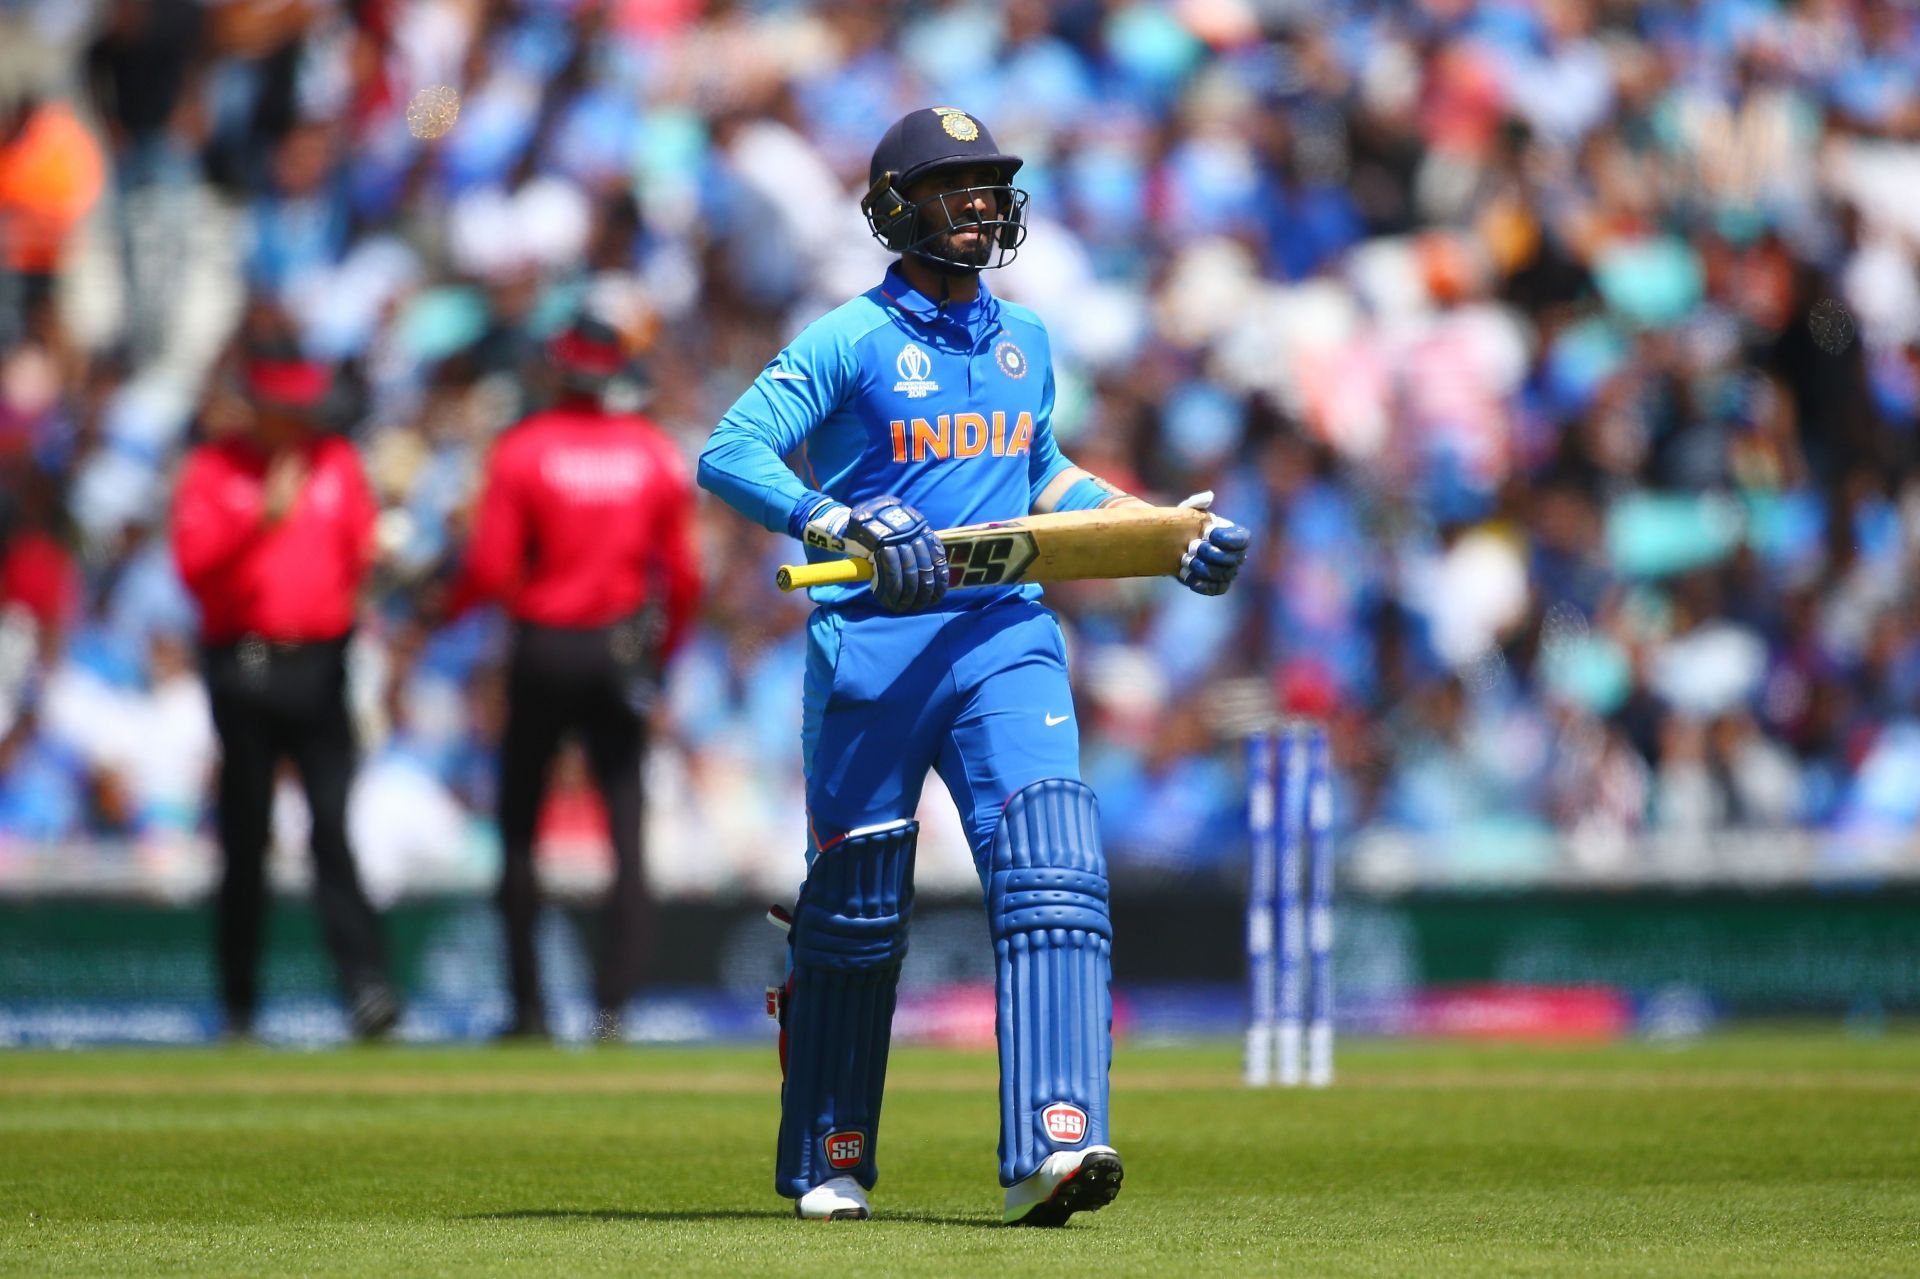 Dinesh Karthik played his last ODI against New Zealand in the 2019 Cricket World Cup.